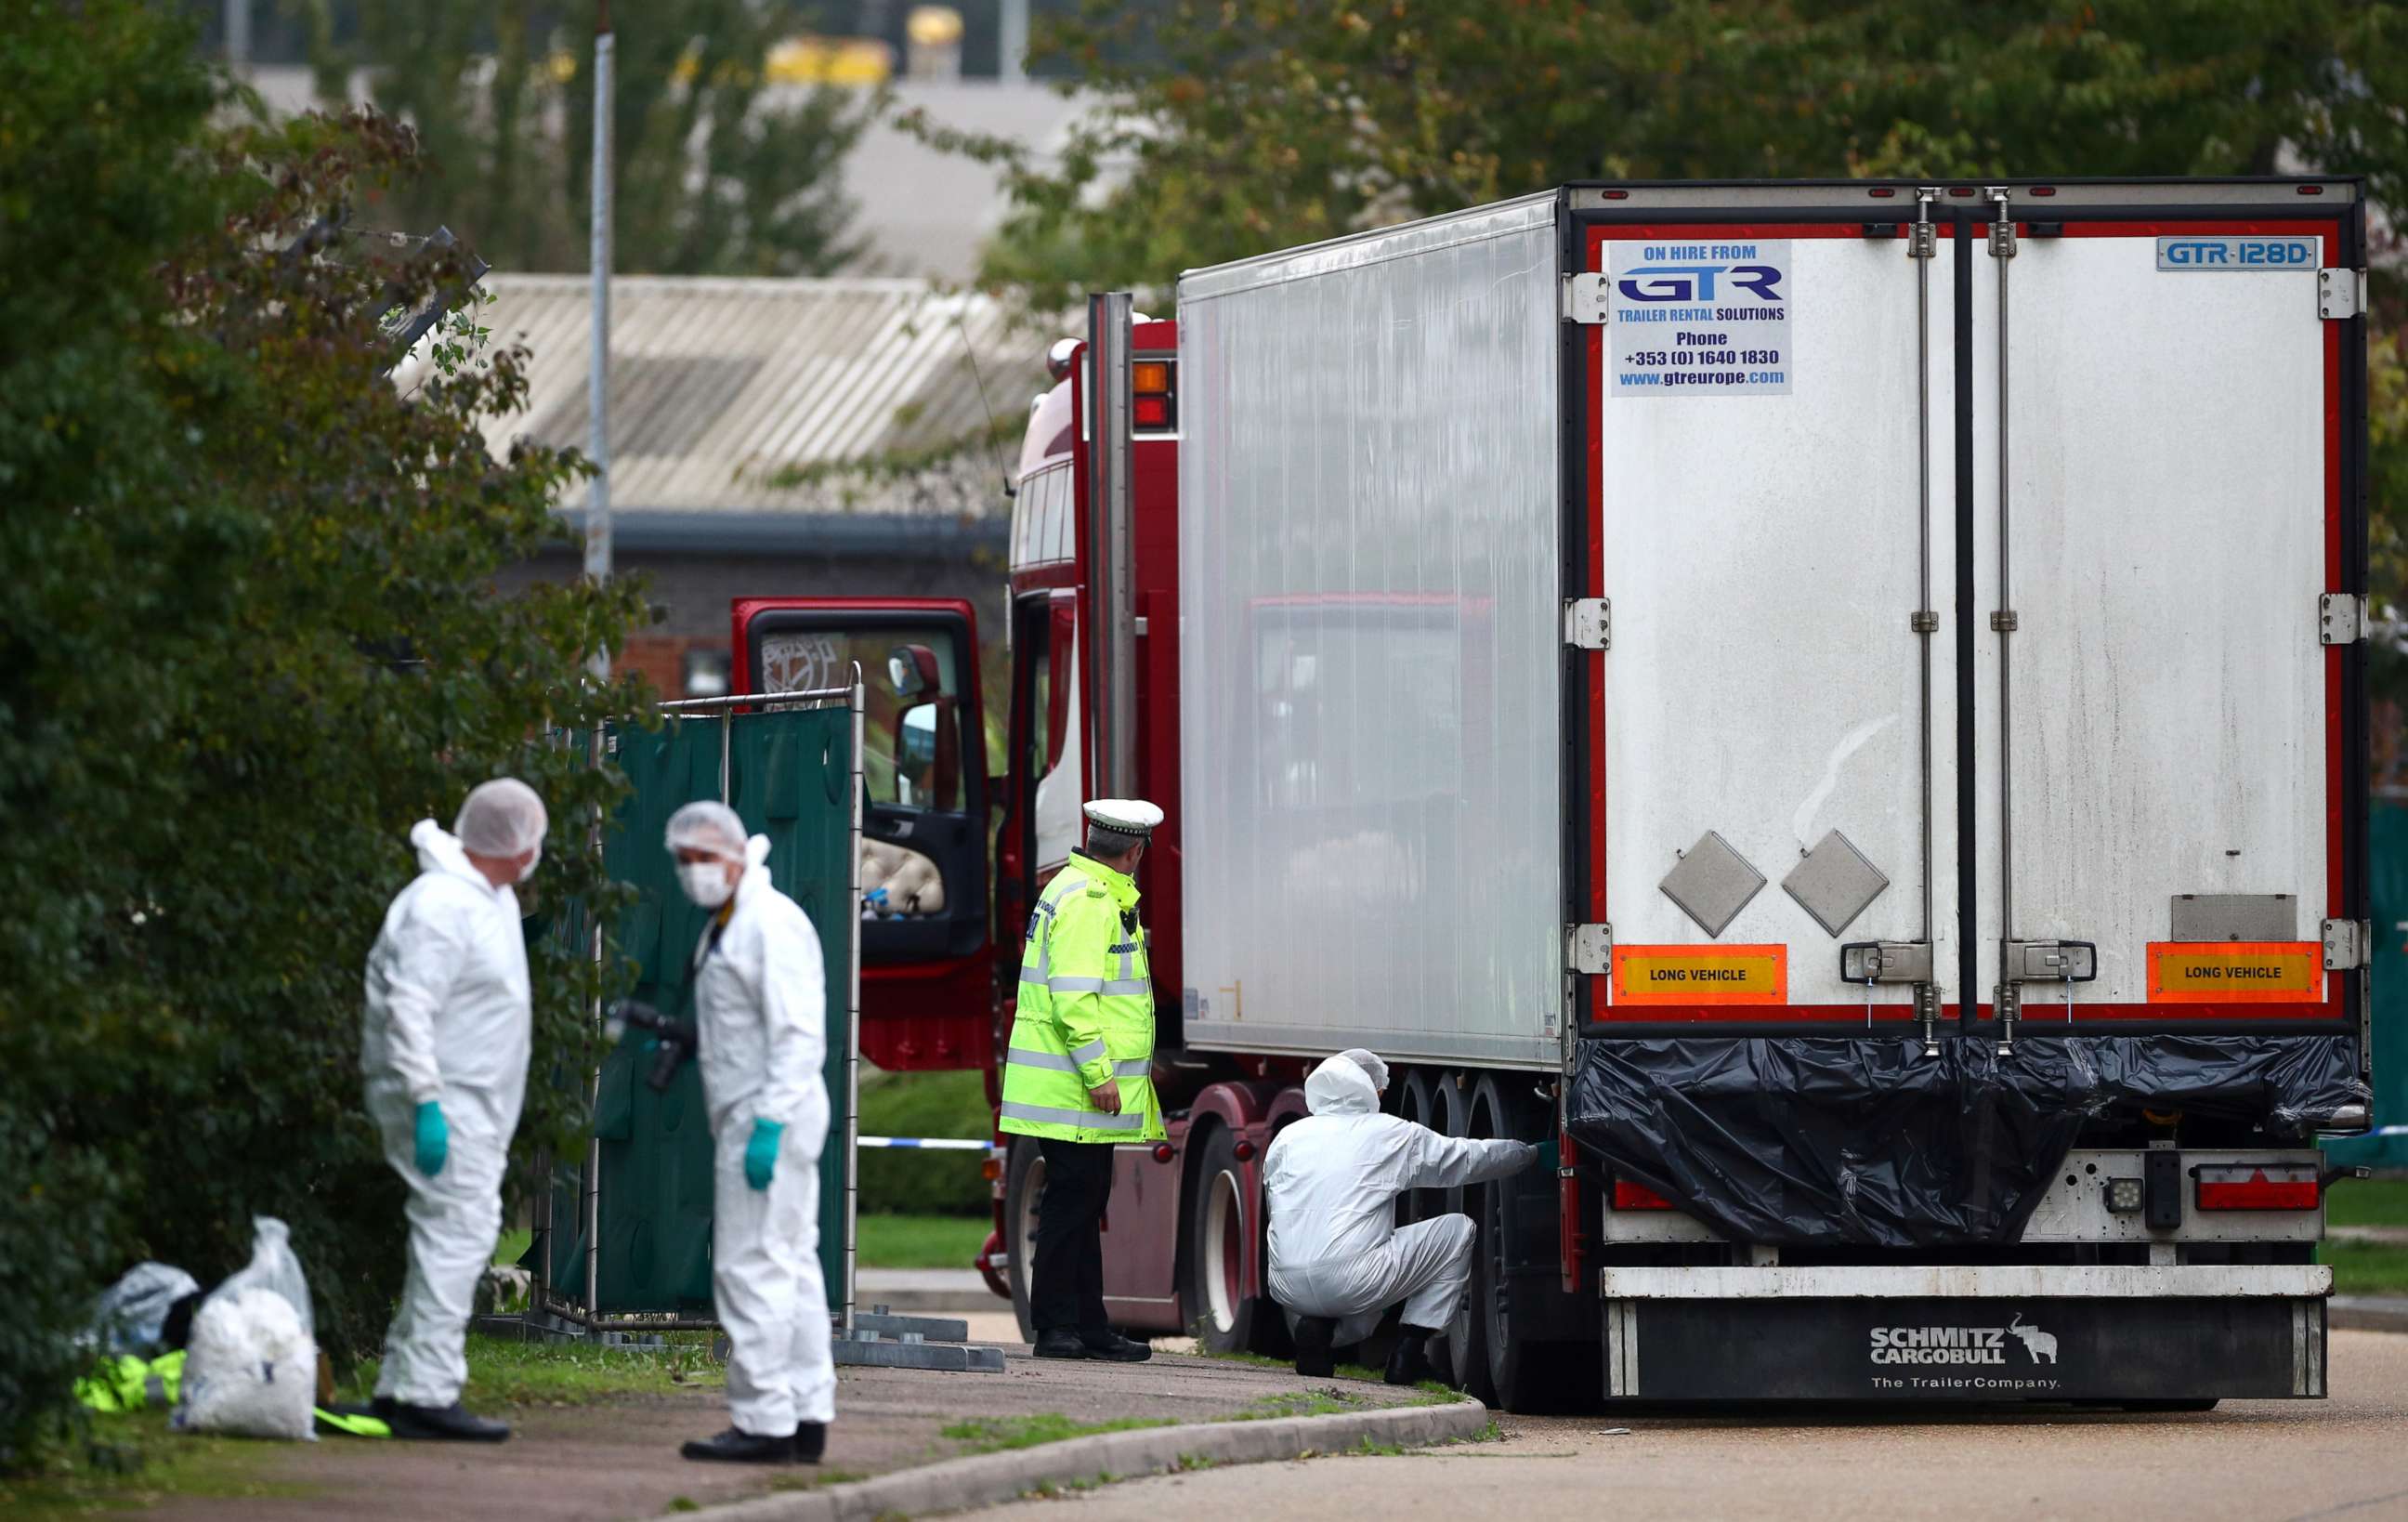 PHOTO: Police are seen at the scene where bodies were discovered in a lorry container, in Grays, Essex, Britain October 23, 2019.  REUTERS/Hannah McKay